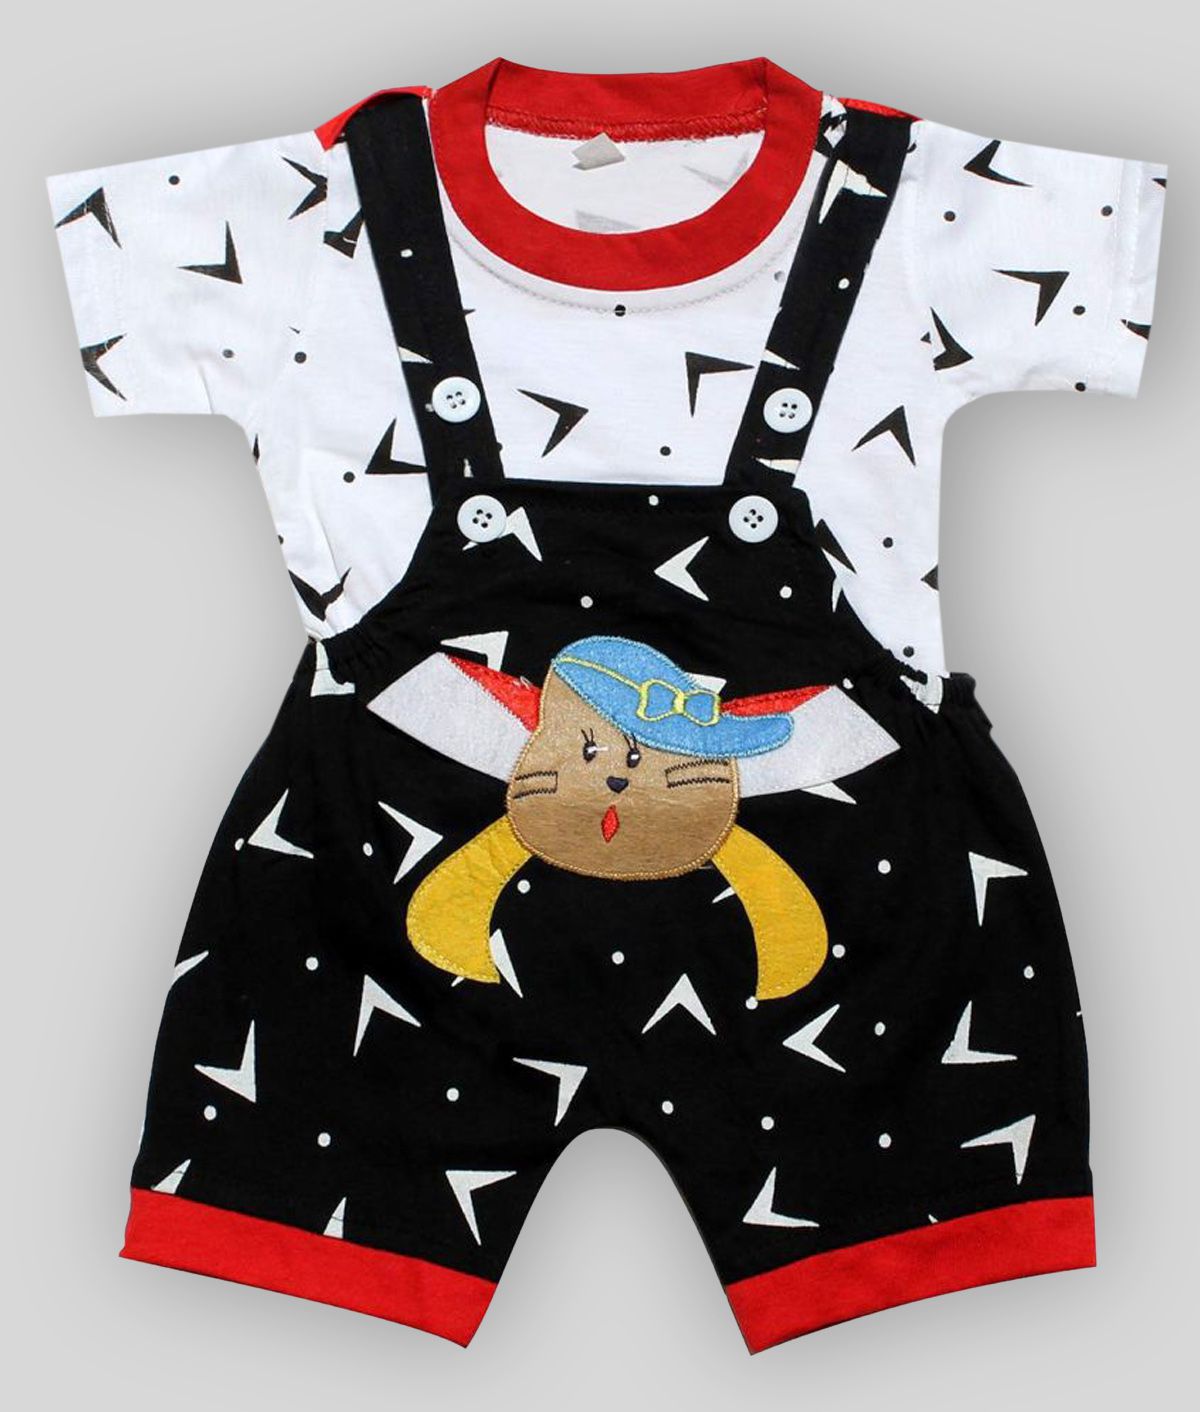     			babeezworld dungaree for Boys & Girls casual printed pure cotton (Black & White ; 9-12 Months)